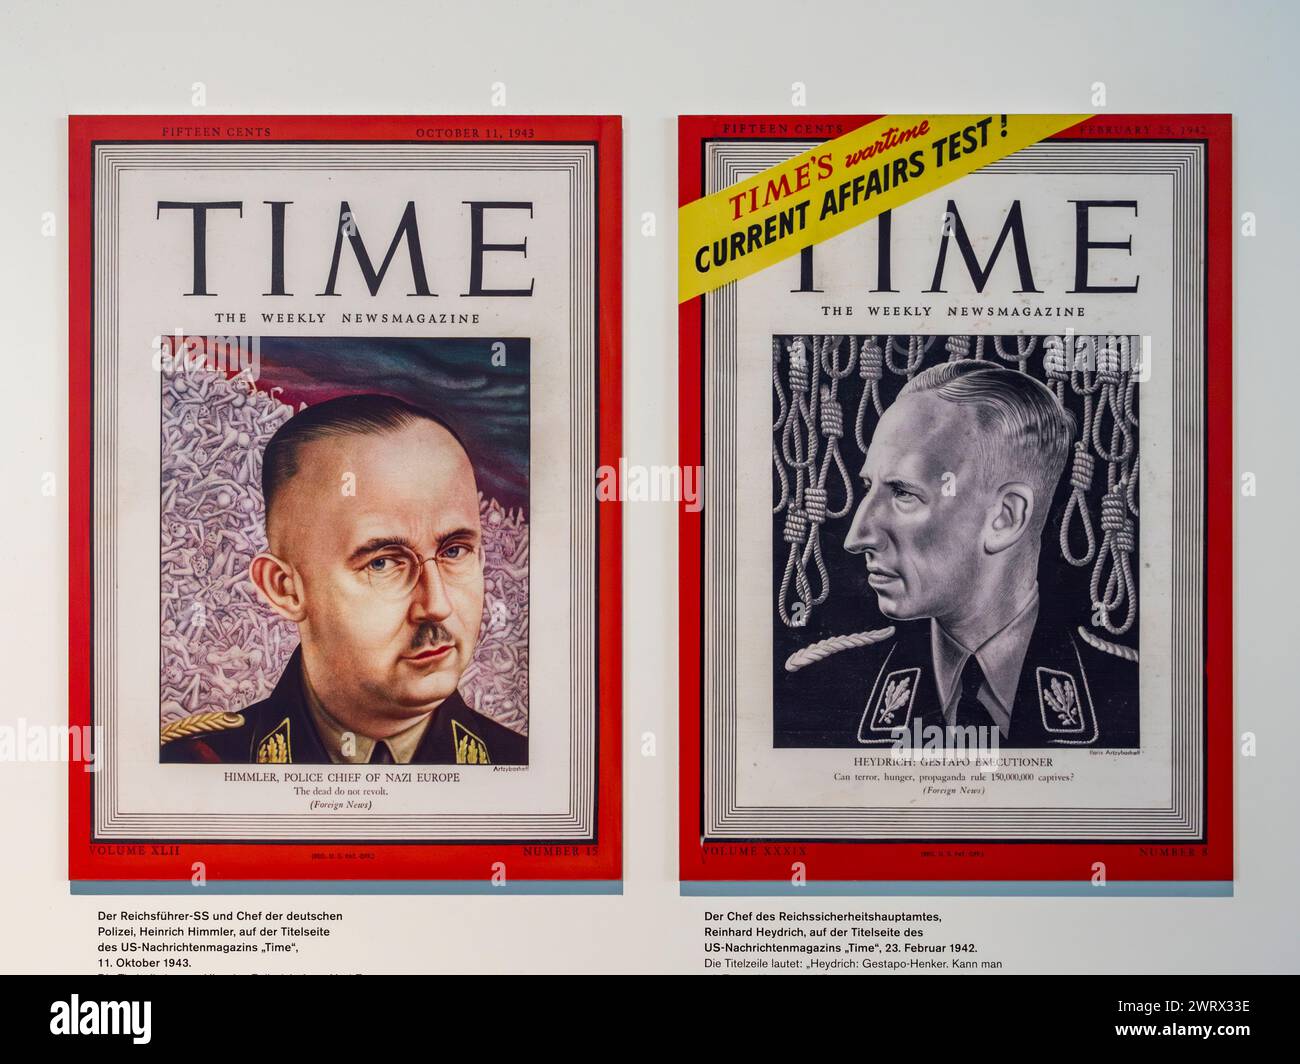 Time magazine covers featuring Heinrich Himmler (11th October 1943) Reinhard Heydrich (23rd February 1942), Topography of Terror, Berlin, Germany, Stock Photo